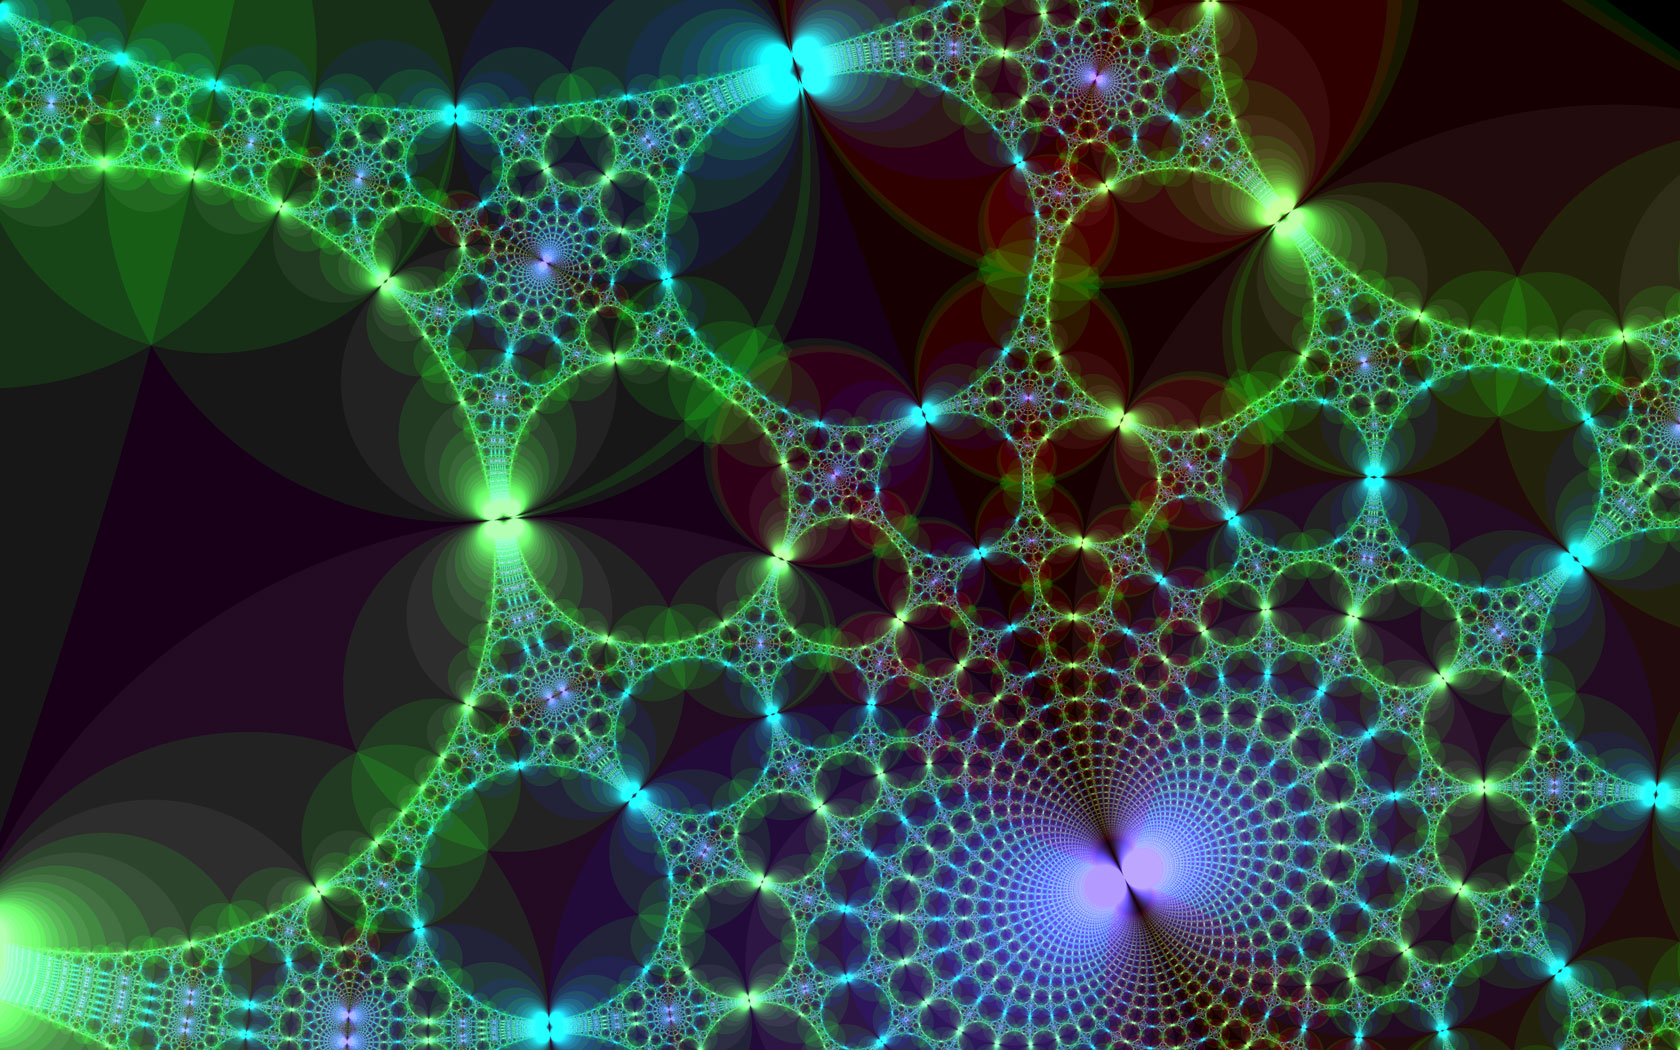 Far Out Fractals.... Geometrical Awesomeness!